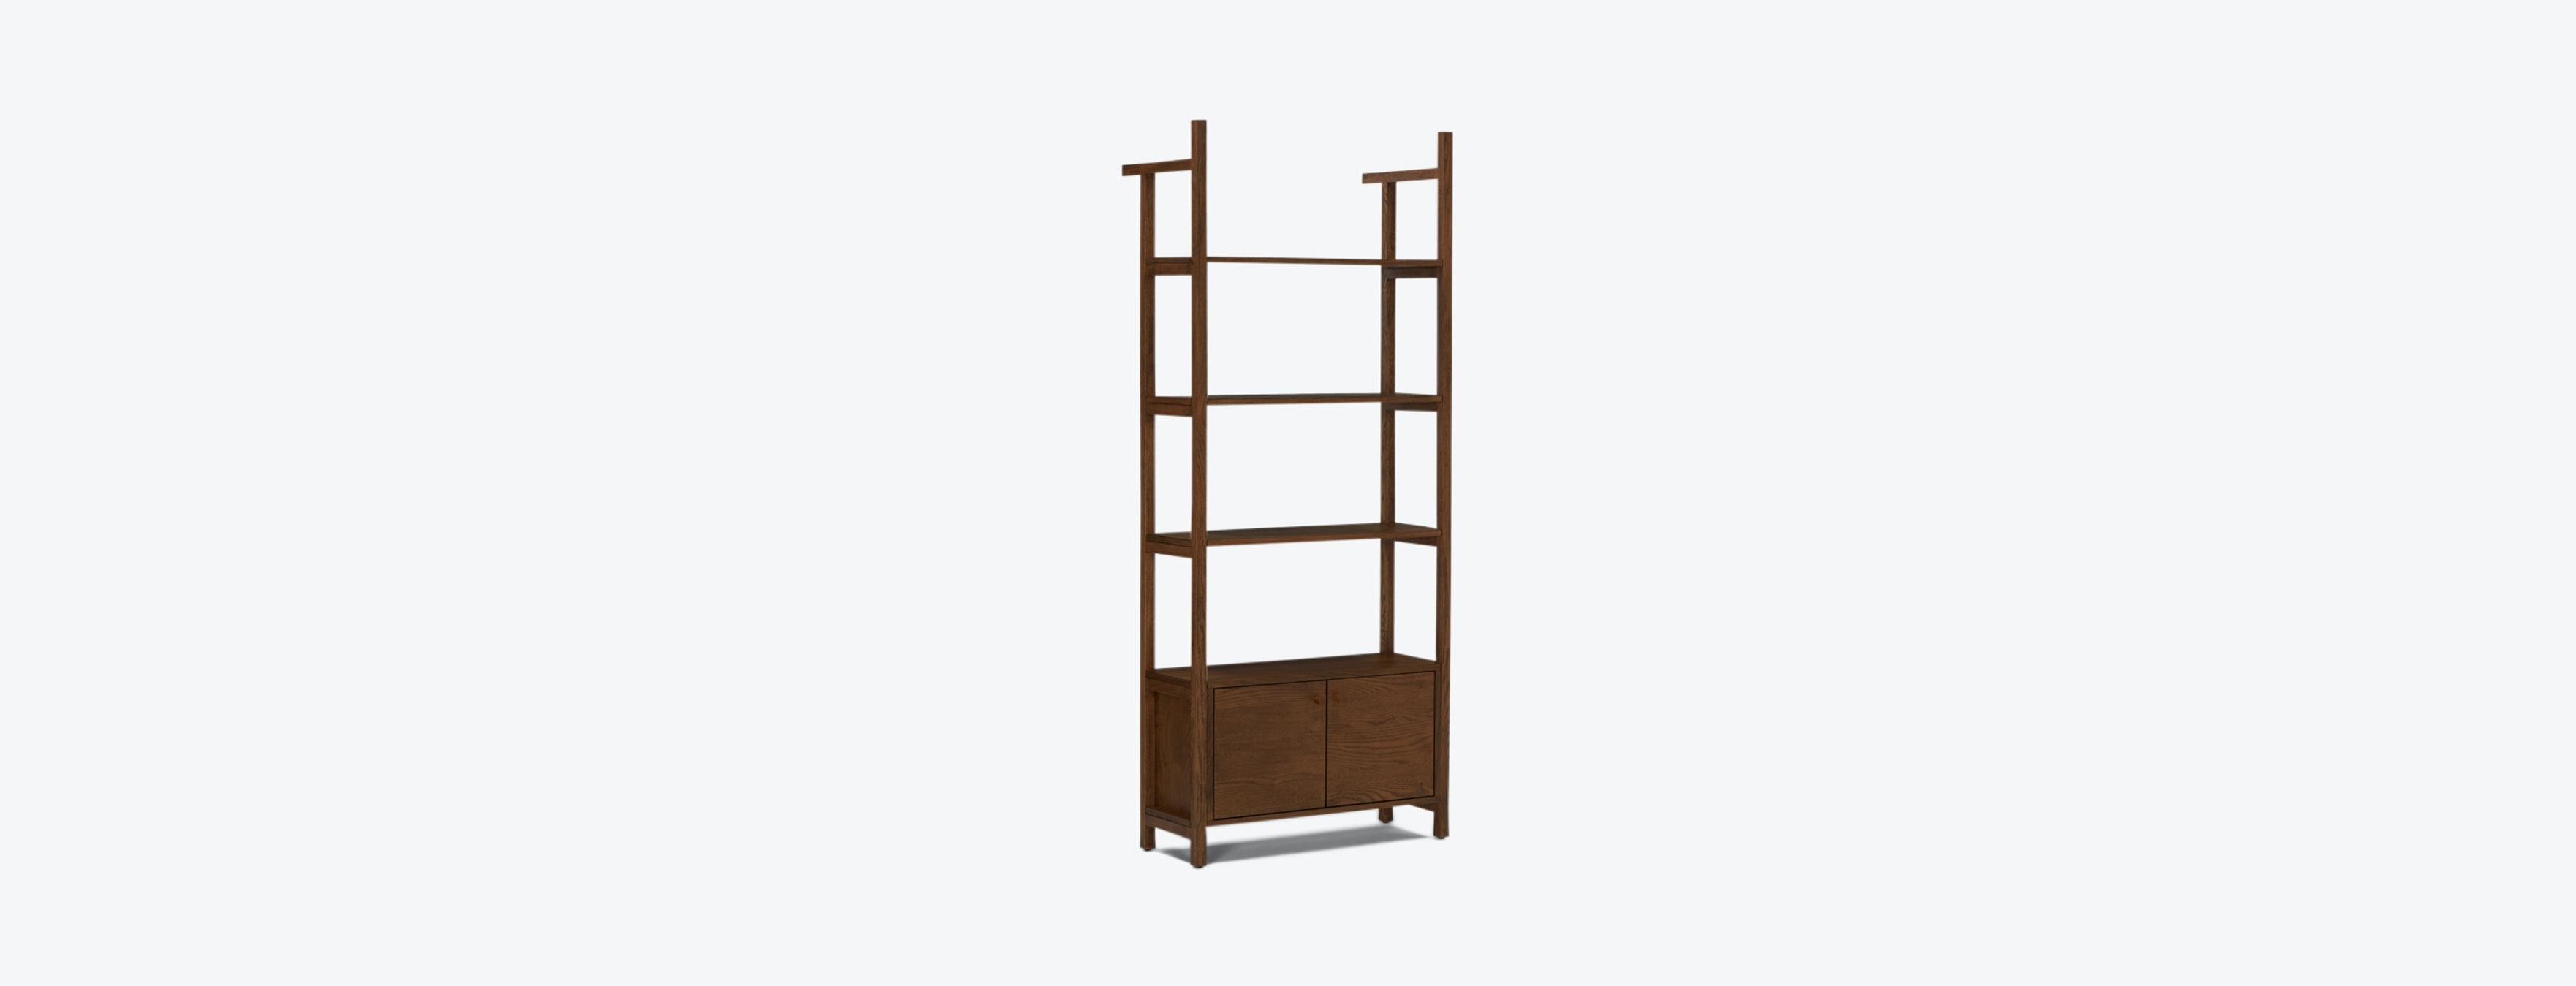 Bevan Bookshelf with Cabinet - DISCONTINUED - Image 0